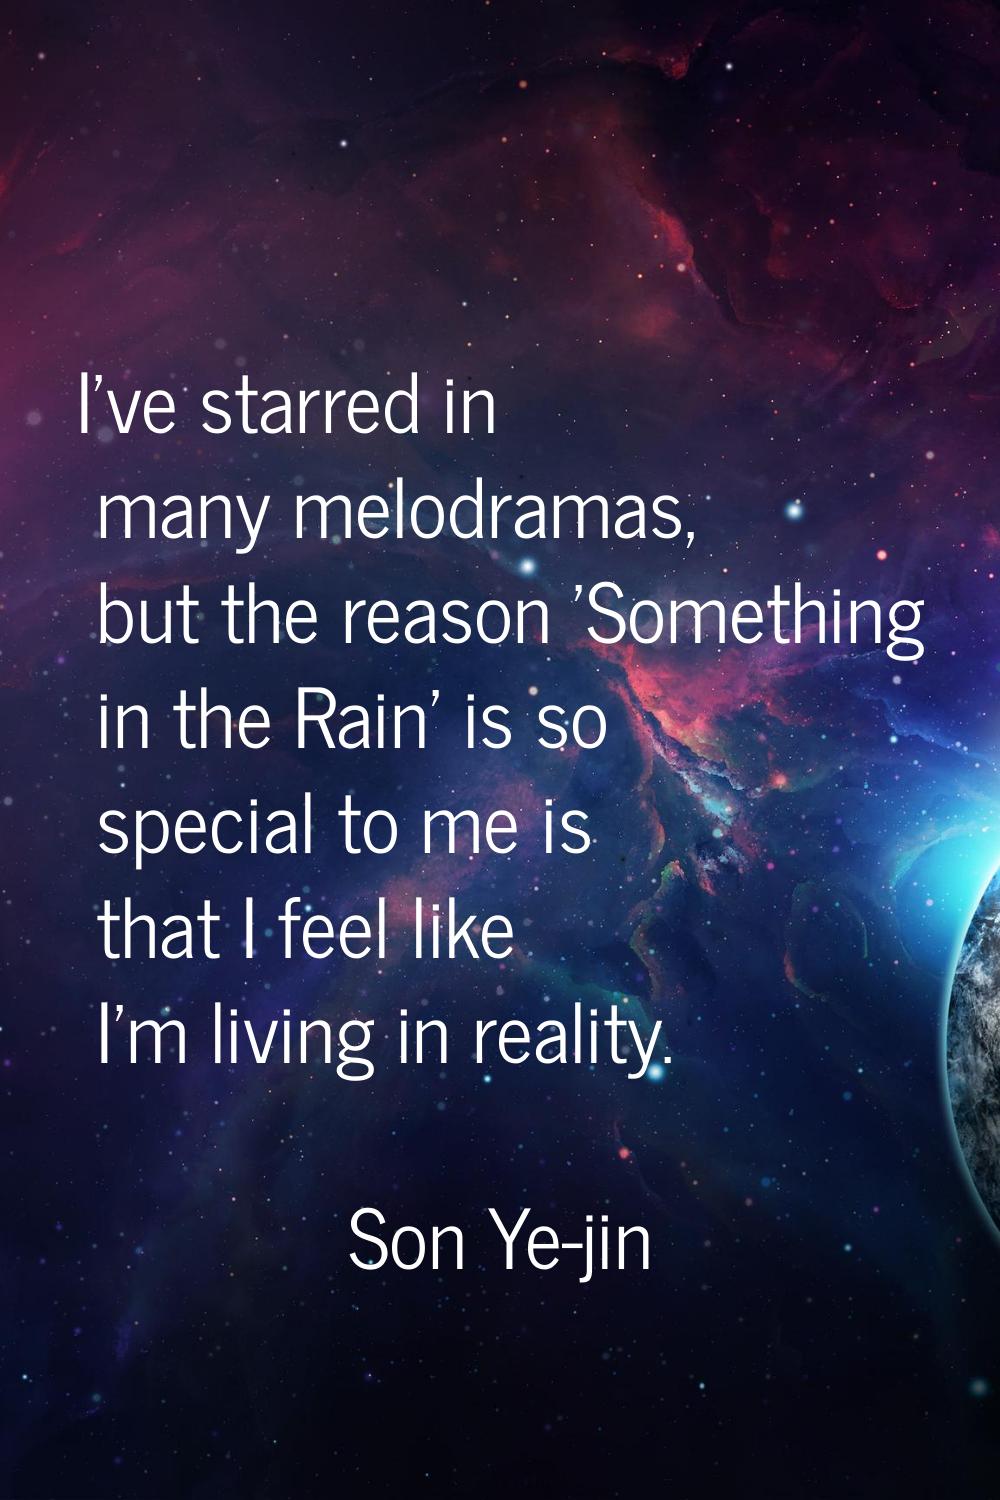 I've starred in many melodramas, but the reason 'Something in the Rain' is so special to me is that